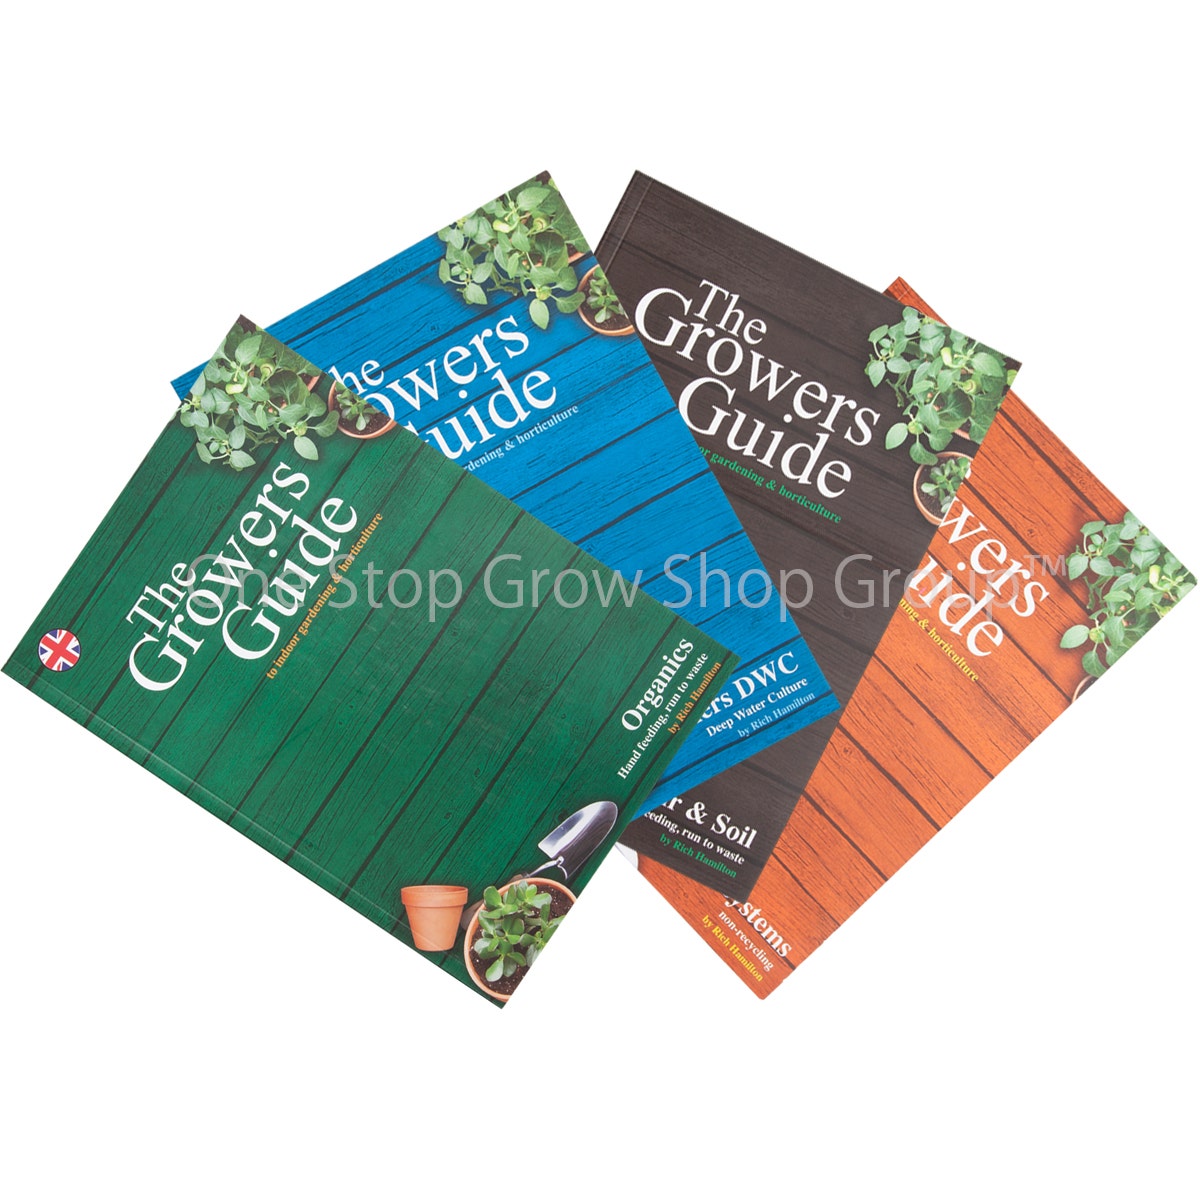 The Grower's Guide Book Series